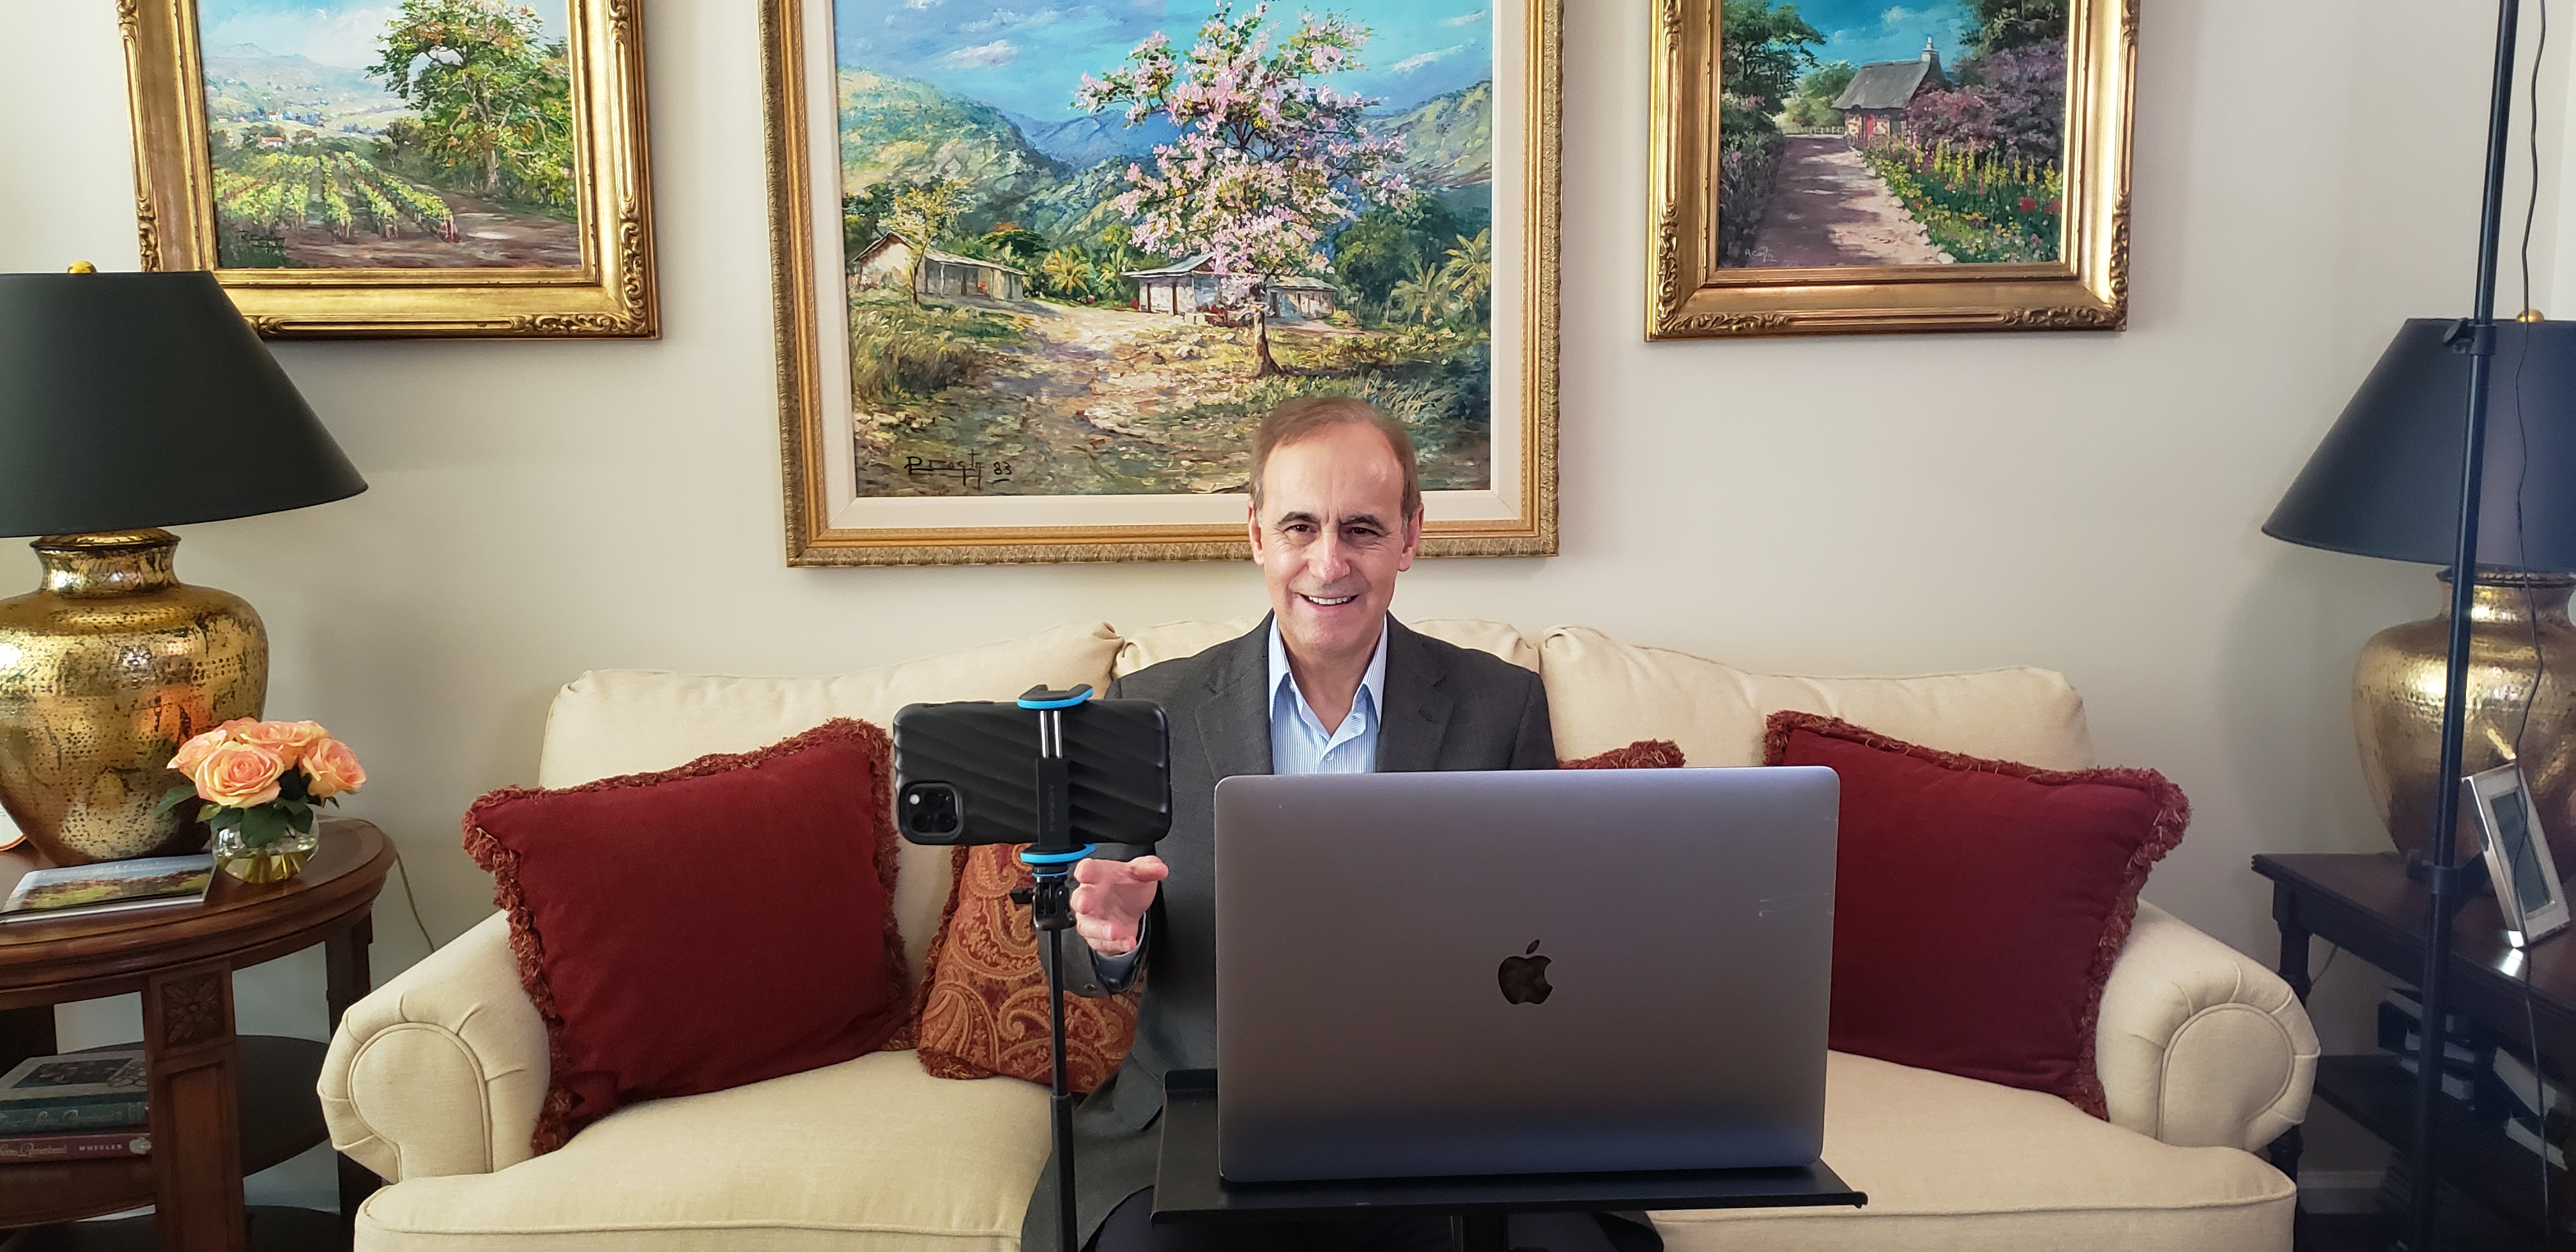 This past April, Robert Costa, speaker/director for the It Is Written Spanish ministry Escrito Está, conducts an online evangelistic series. The pastor and evangelist reached more than 170,000 per night of the series. Photo provided by It Is Written